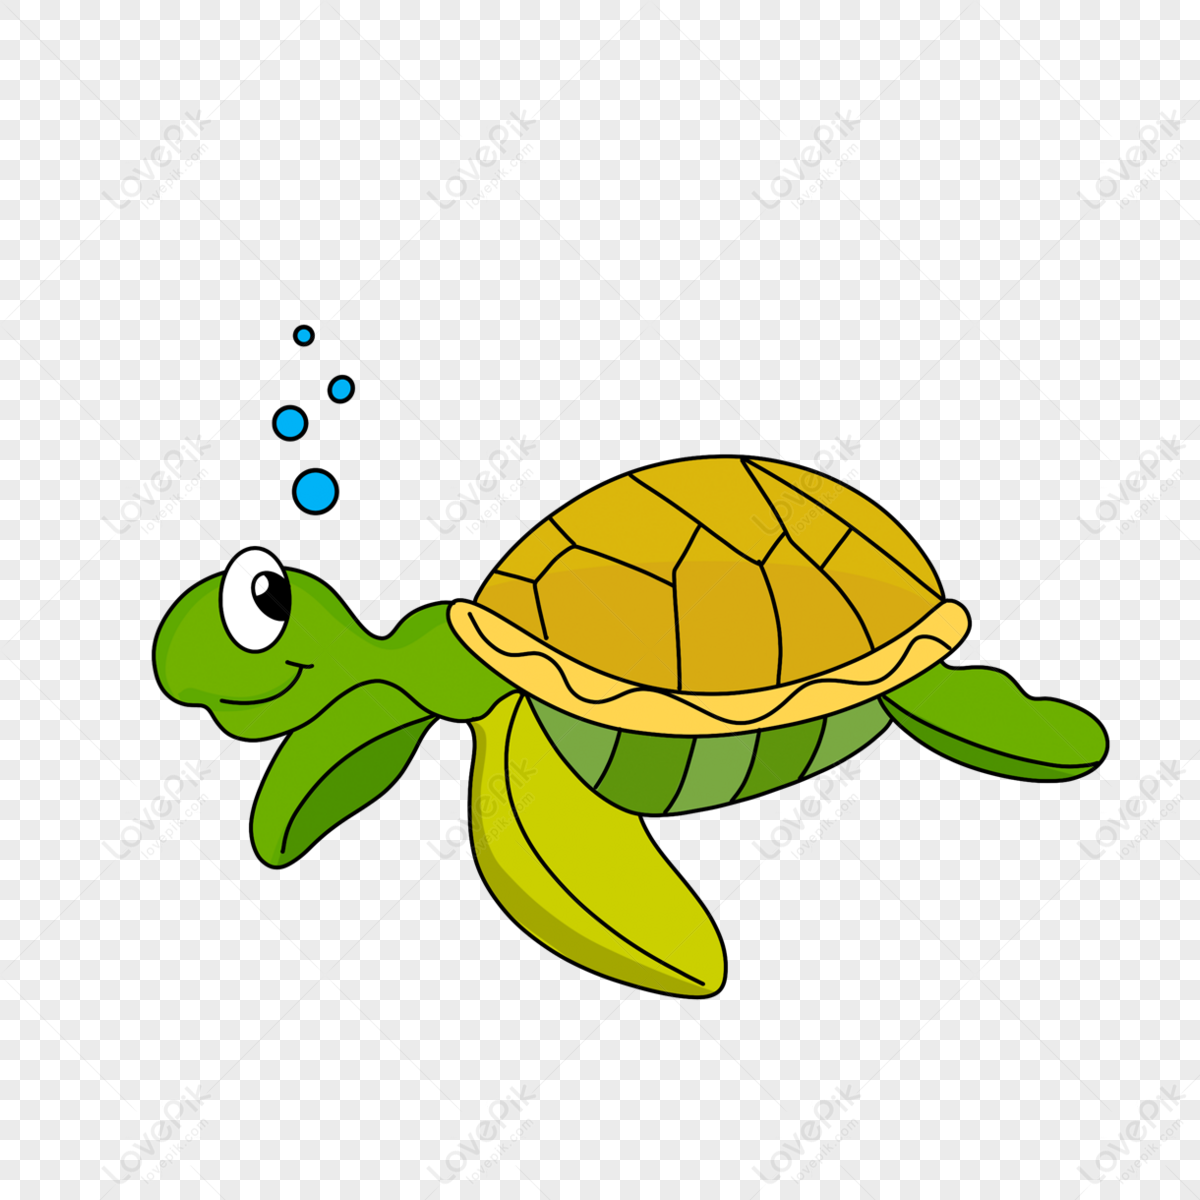 Turtle Chef Cartoon Doodle Kawaii Anime Coloring Page Cute Illustration  Drawing Clipart Character Chibi Manga Comics, Turtle Drawing, Car Drawing,  Anime Drawing PNG Transparent Image and Clipart for Free Download